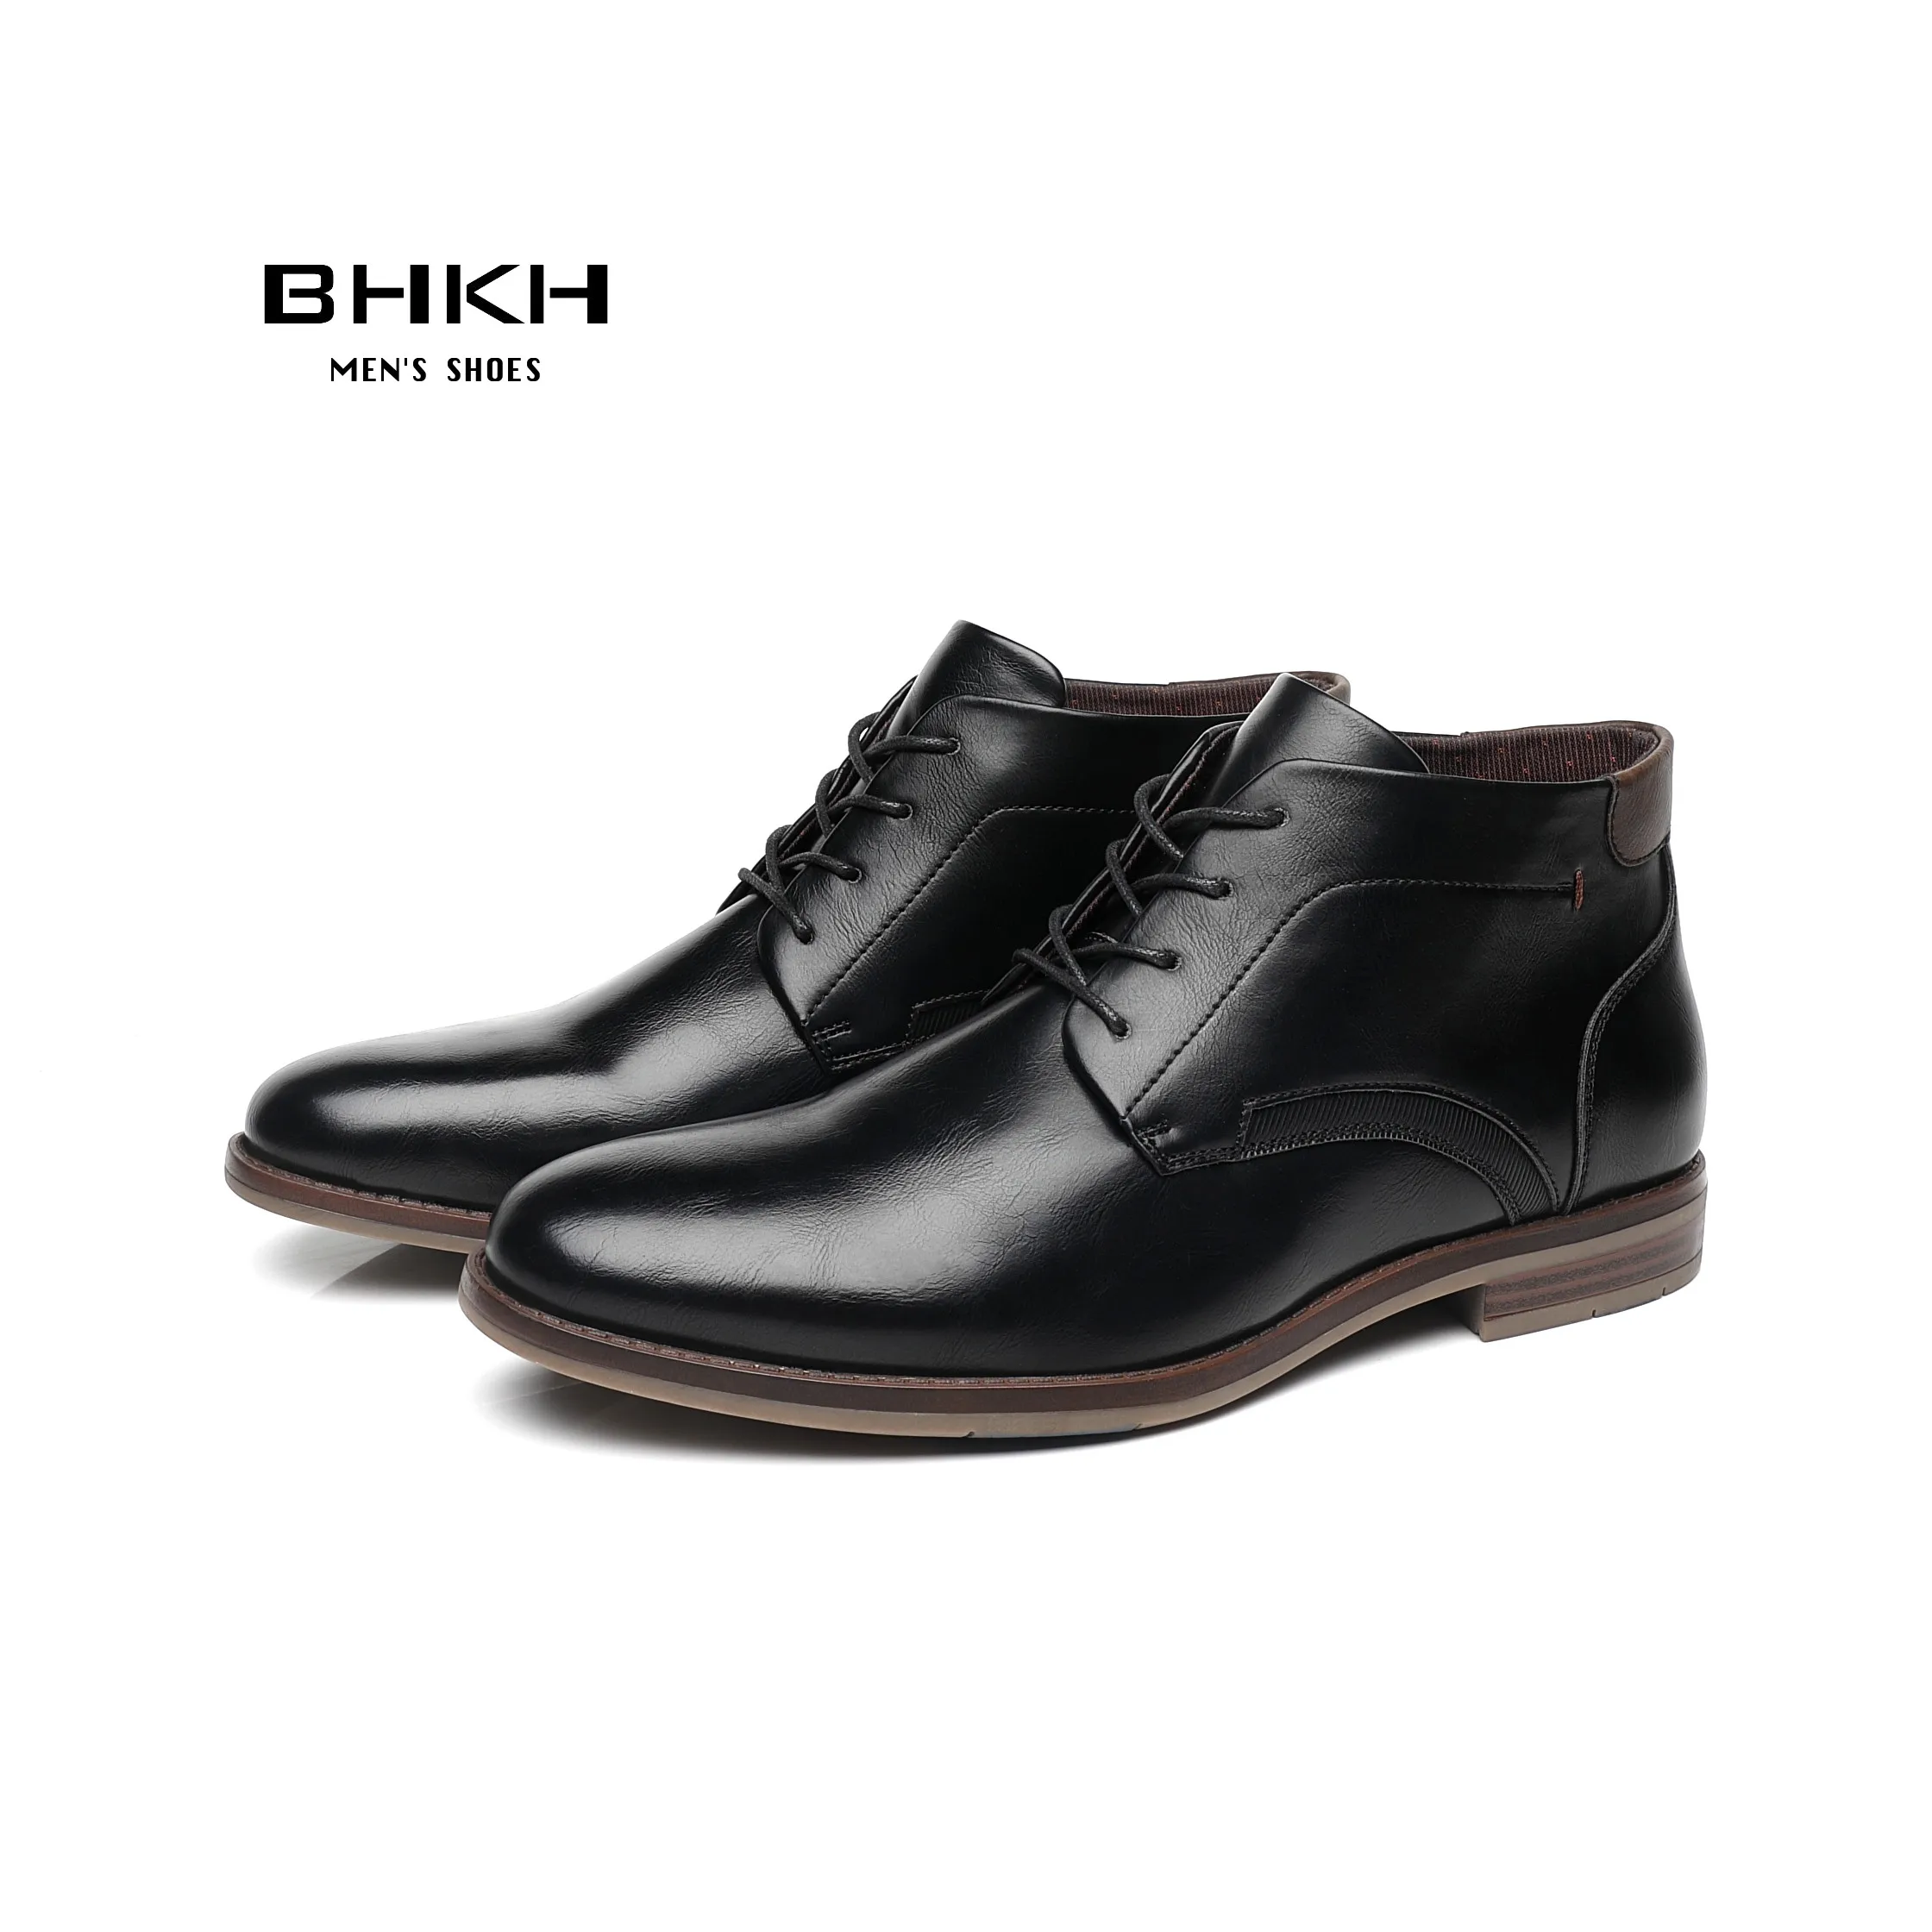 

BHKH 2021 Autumn/ Winter Men Boots Lace-up Ankle Boots Smart Business Work Office Dress Shoes Formal Man Shoes